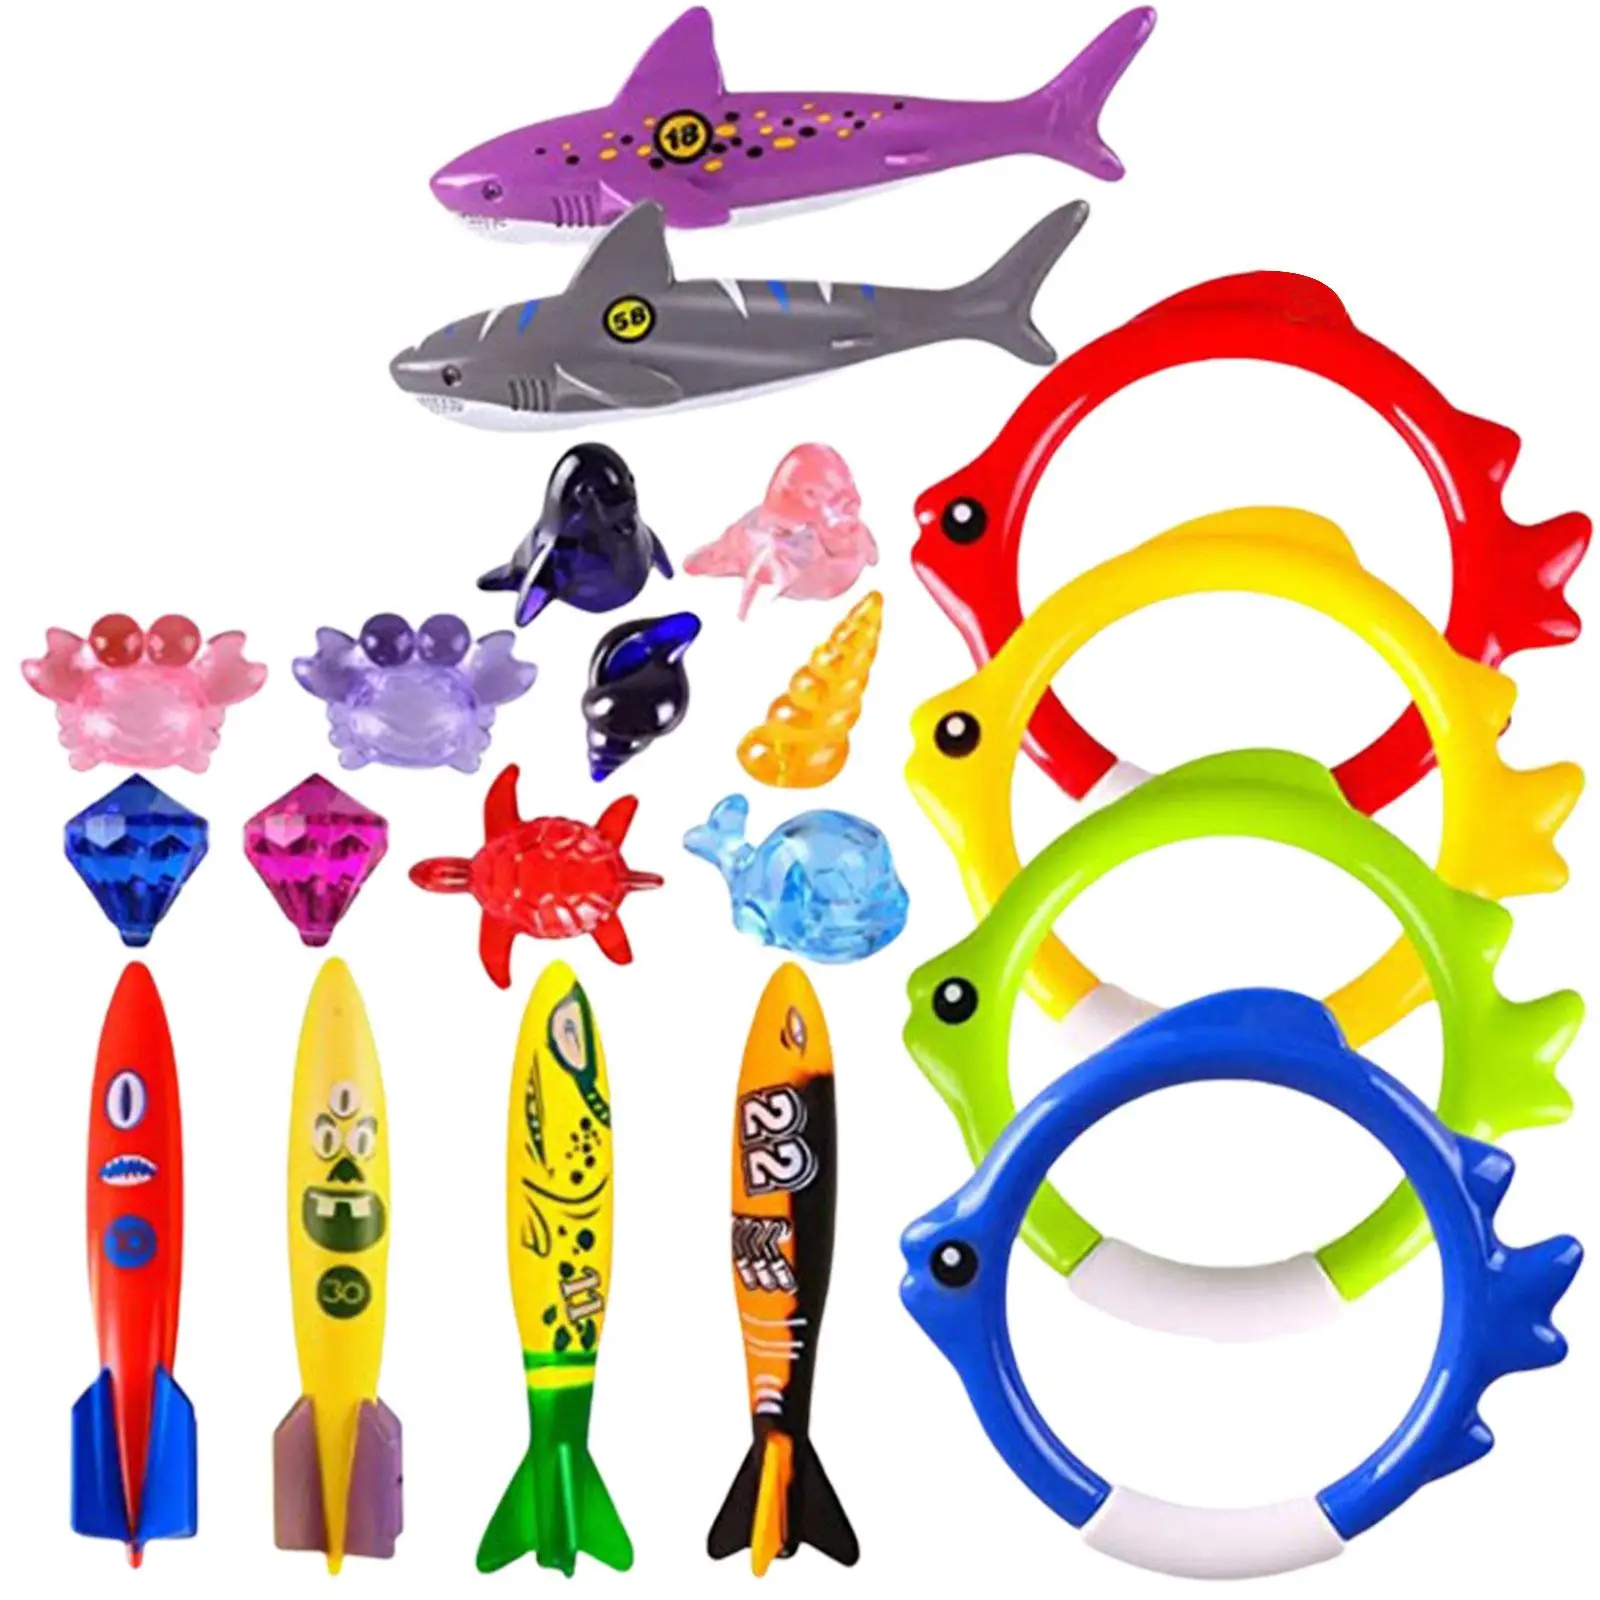 

20x Underwater Swimming Pool Toys Gems Shark Rings Diving Toys Underwater Dive Gifts for Diving Practice Boys Girls Kids Ages 3+